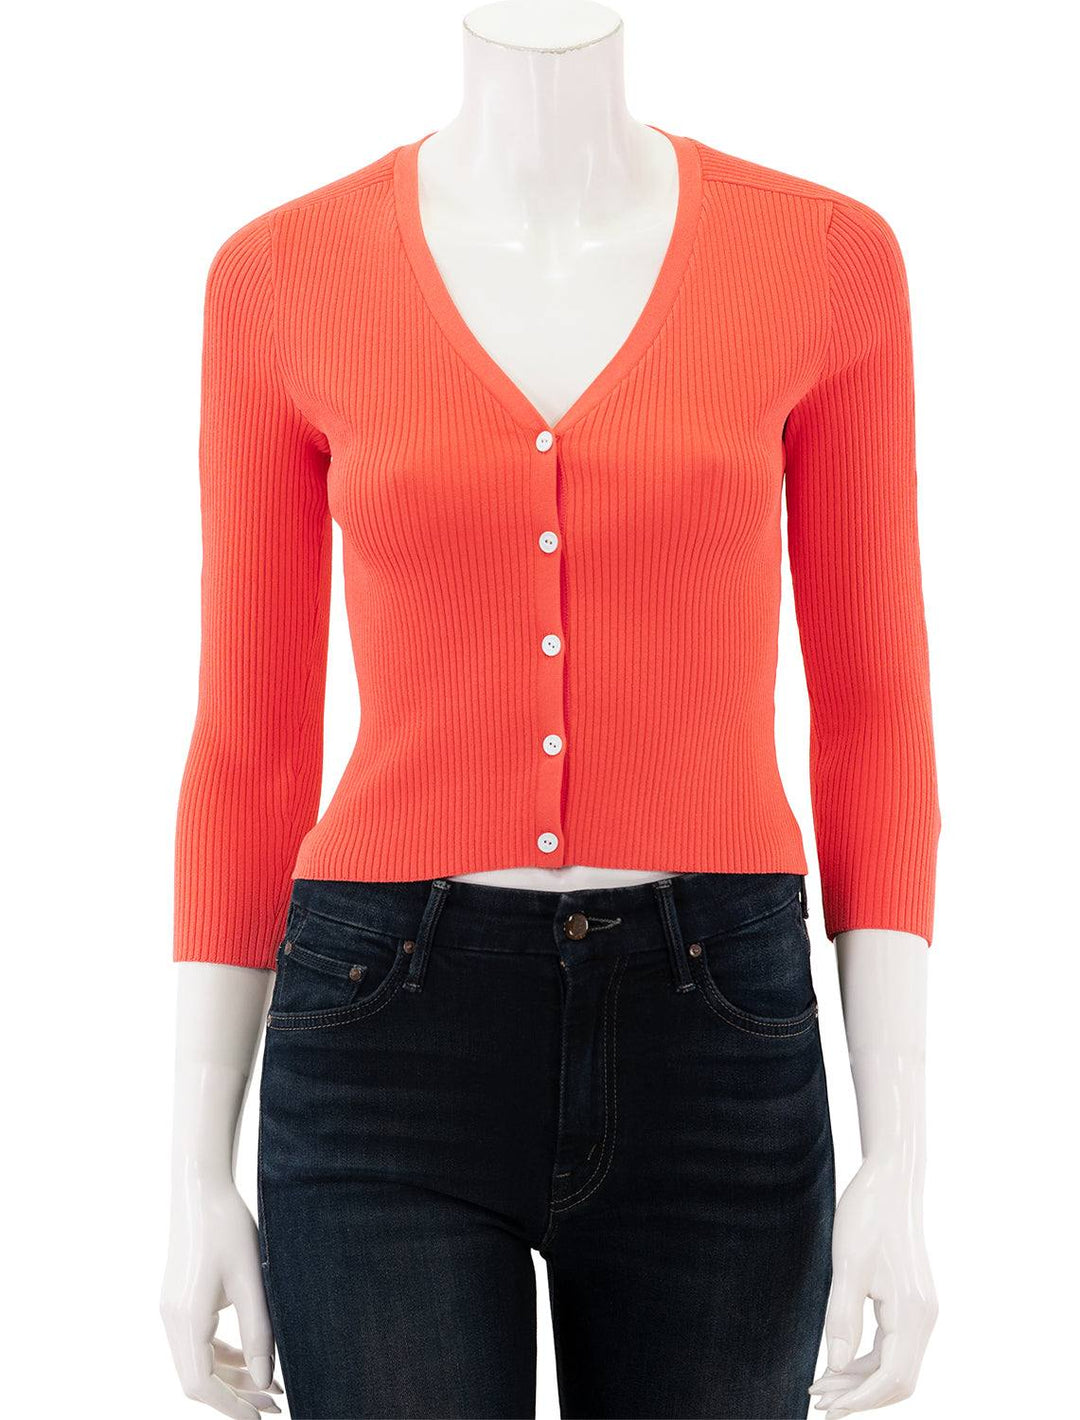 Front view of Rag & Bones's asher v cardigan in coral.